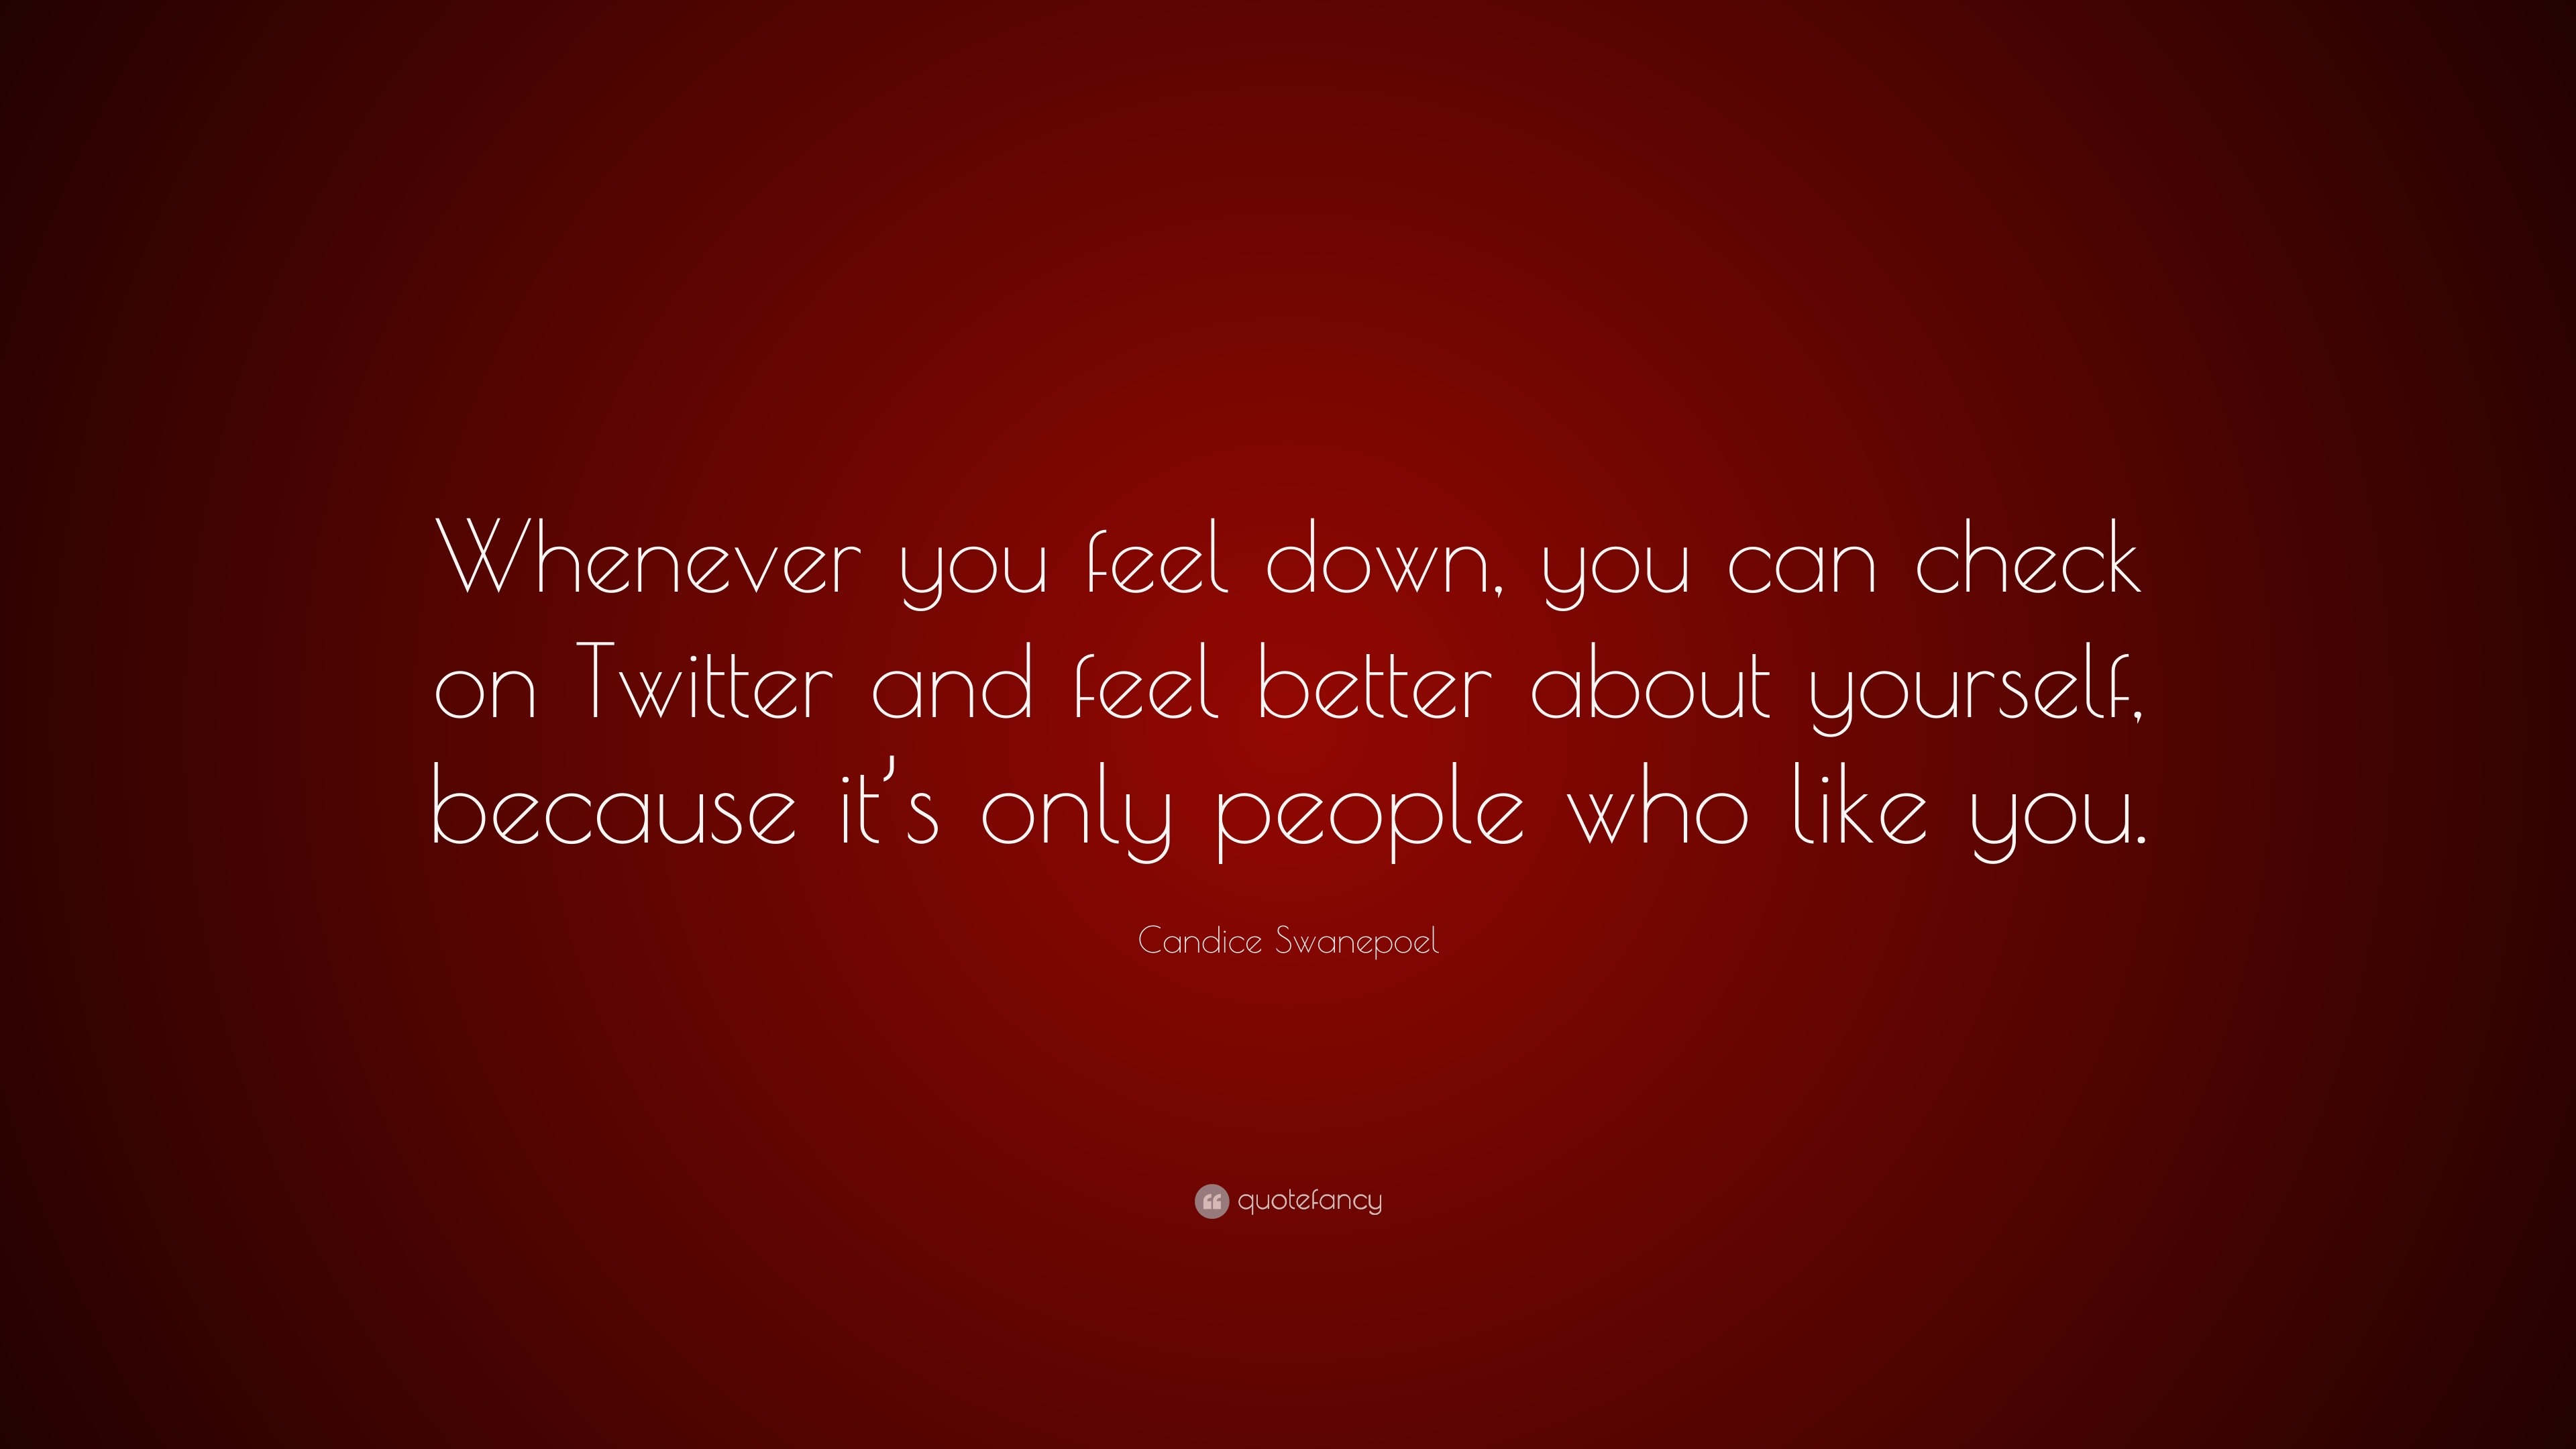 Candice Swanepoel Quote: “Whenever You Feel Down, You Can Check On Twitter And Feel Better About